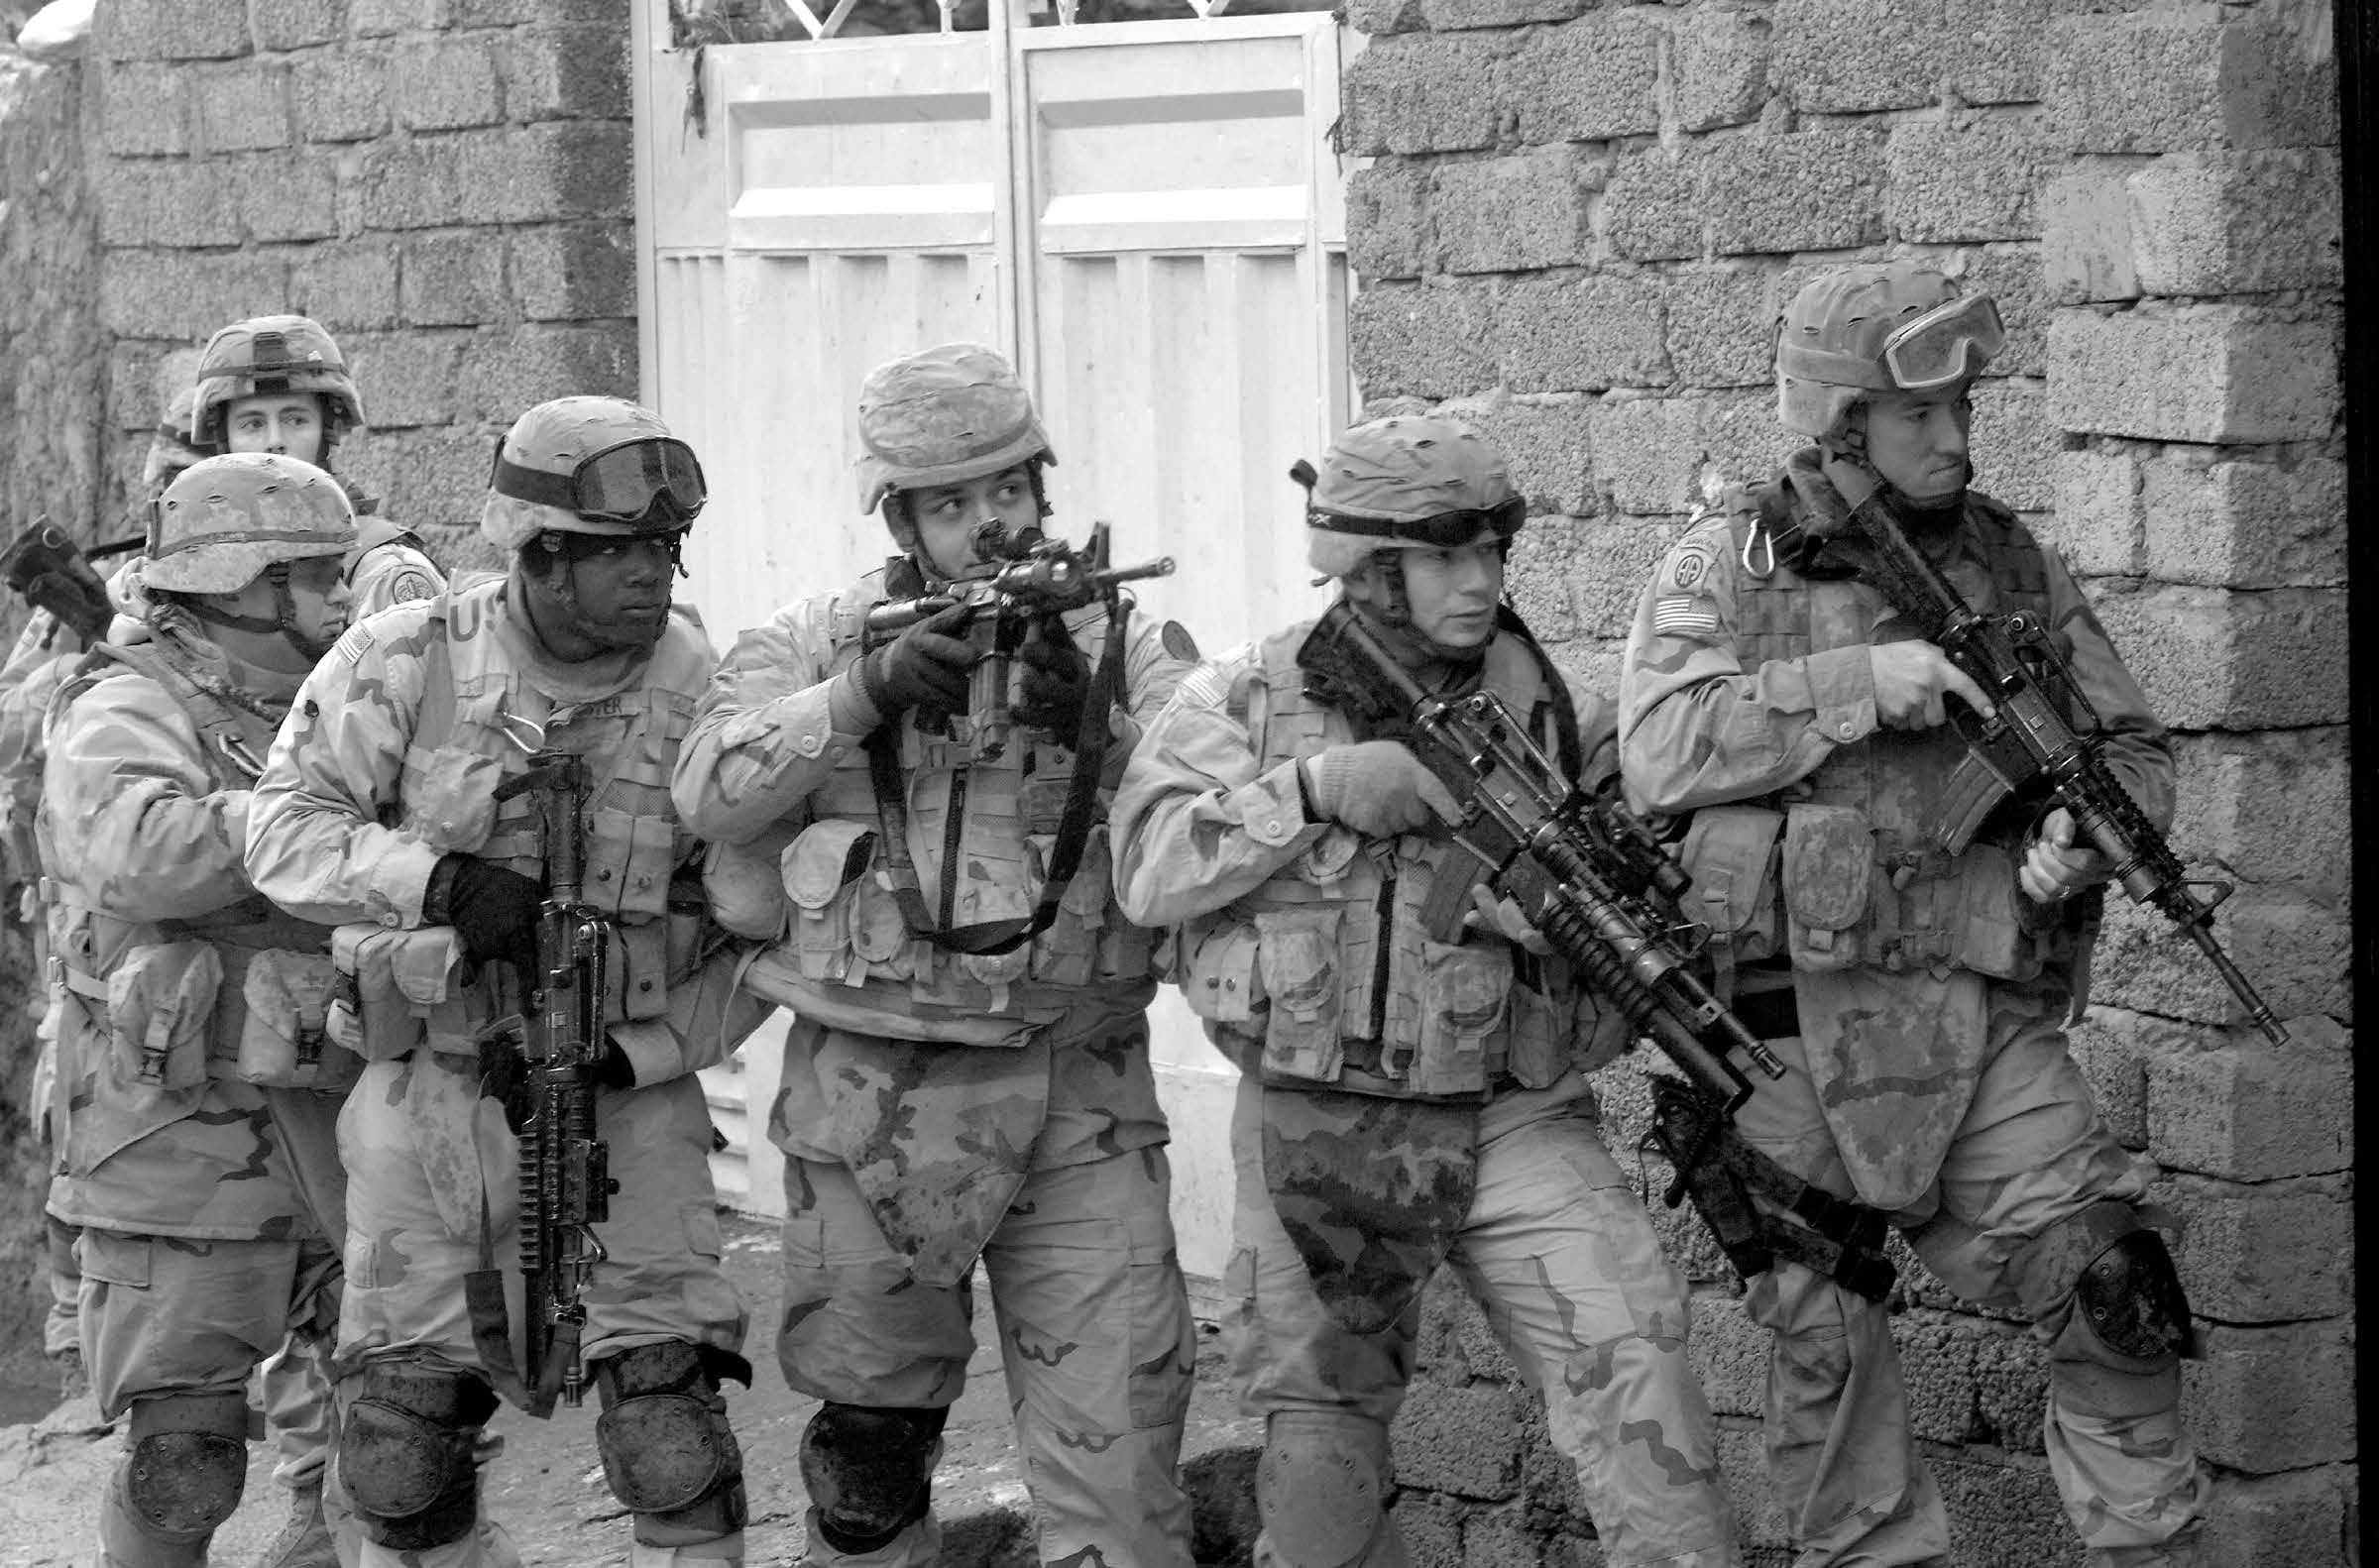 Soldiers from the U.S. Army’s 3rd Armored Cavalry Regiment prepare to enter a building during a combat patrol in Tall Afar, Iraq, on February 7, 2006. Courtesy of DoD.